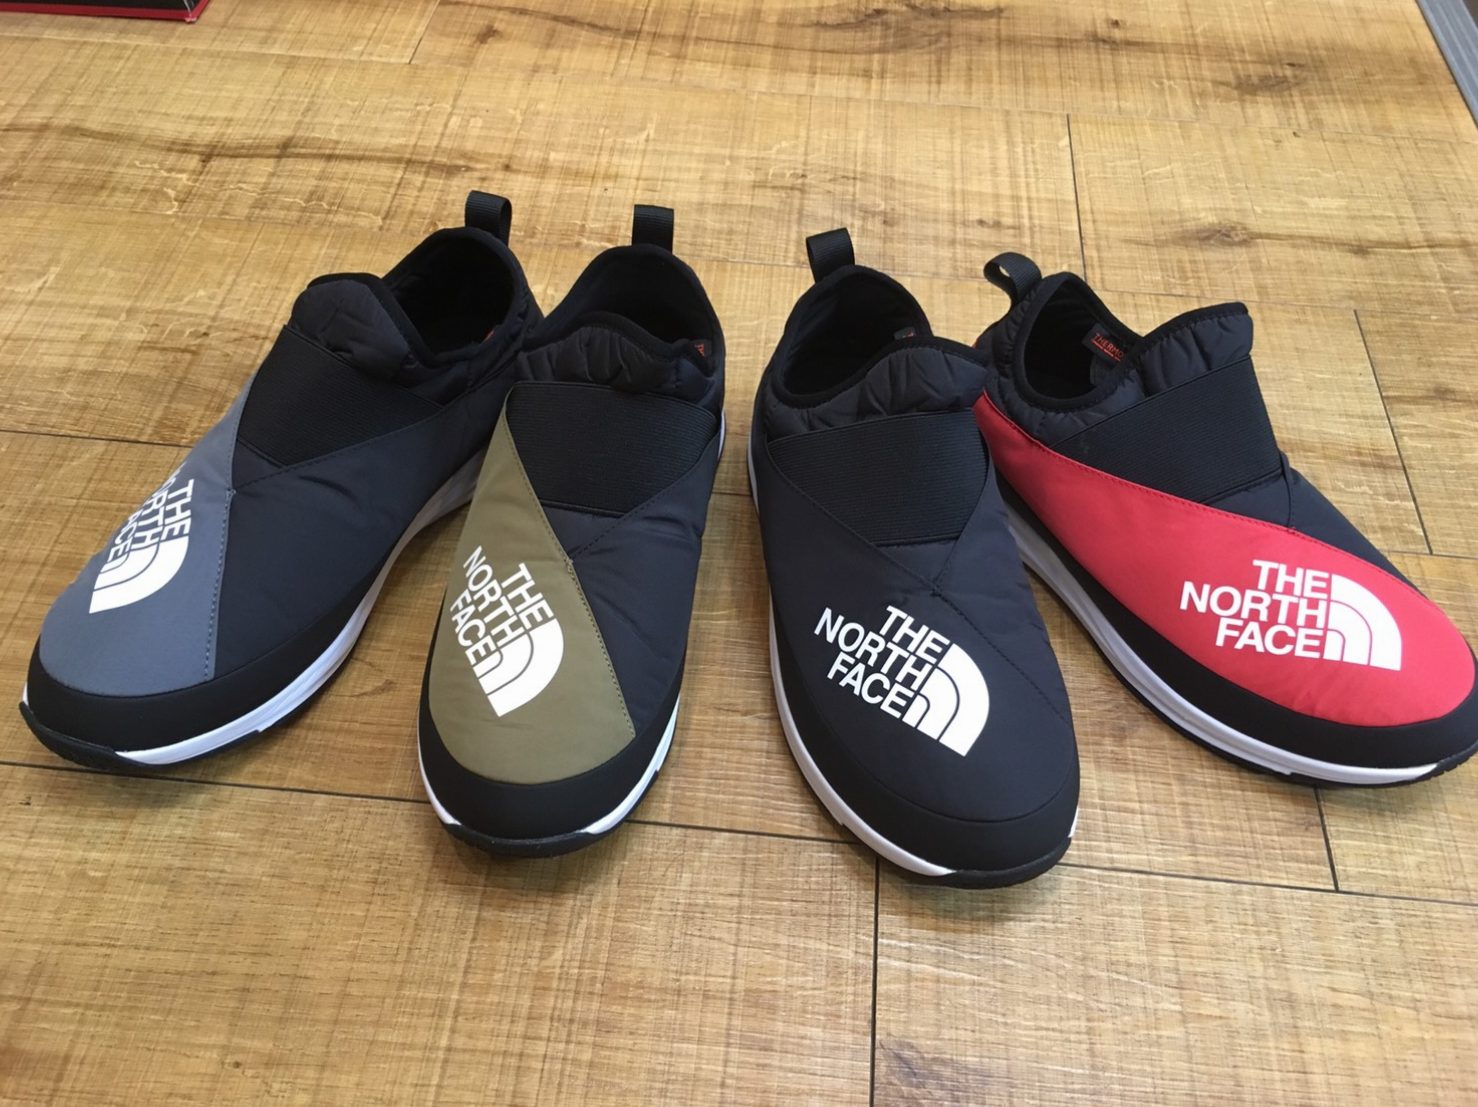 THE NORTH FACE Traction Lite Moc III